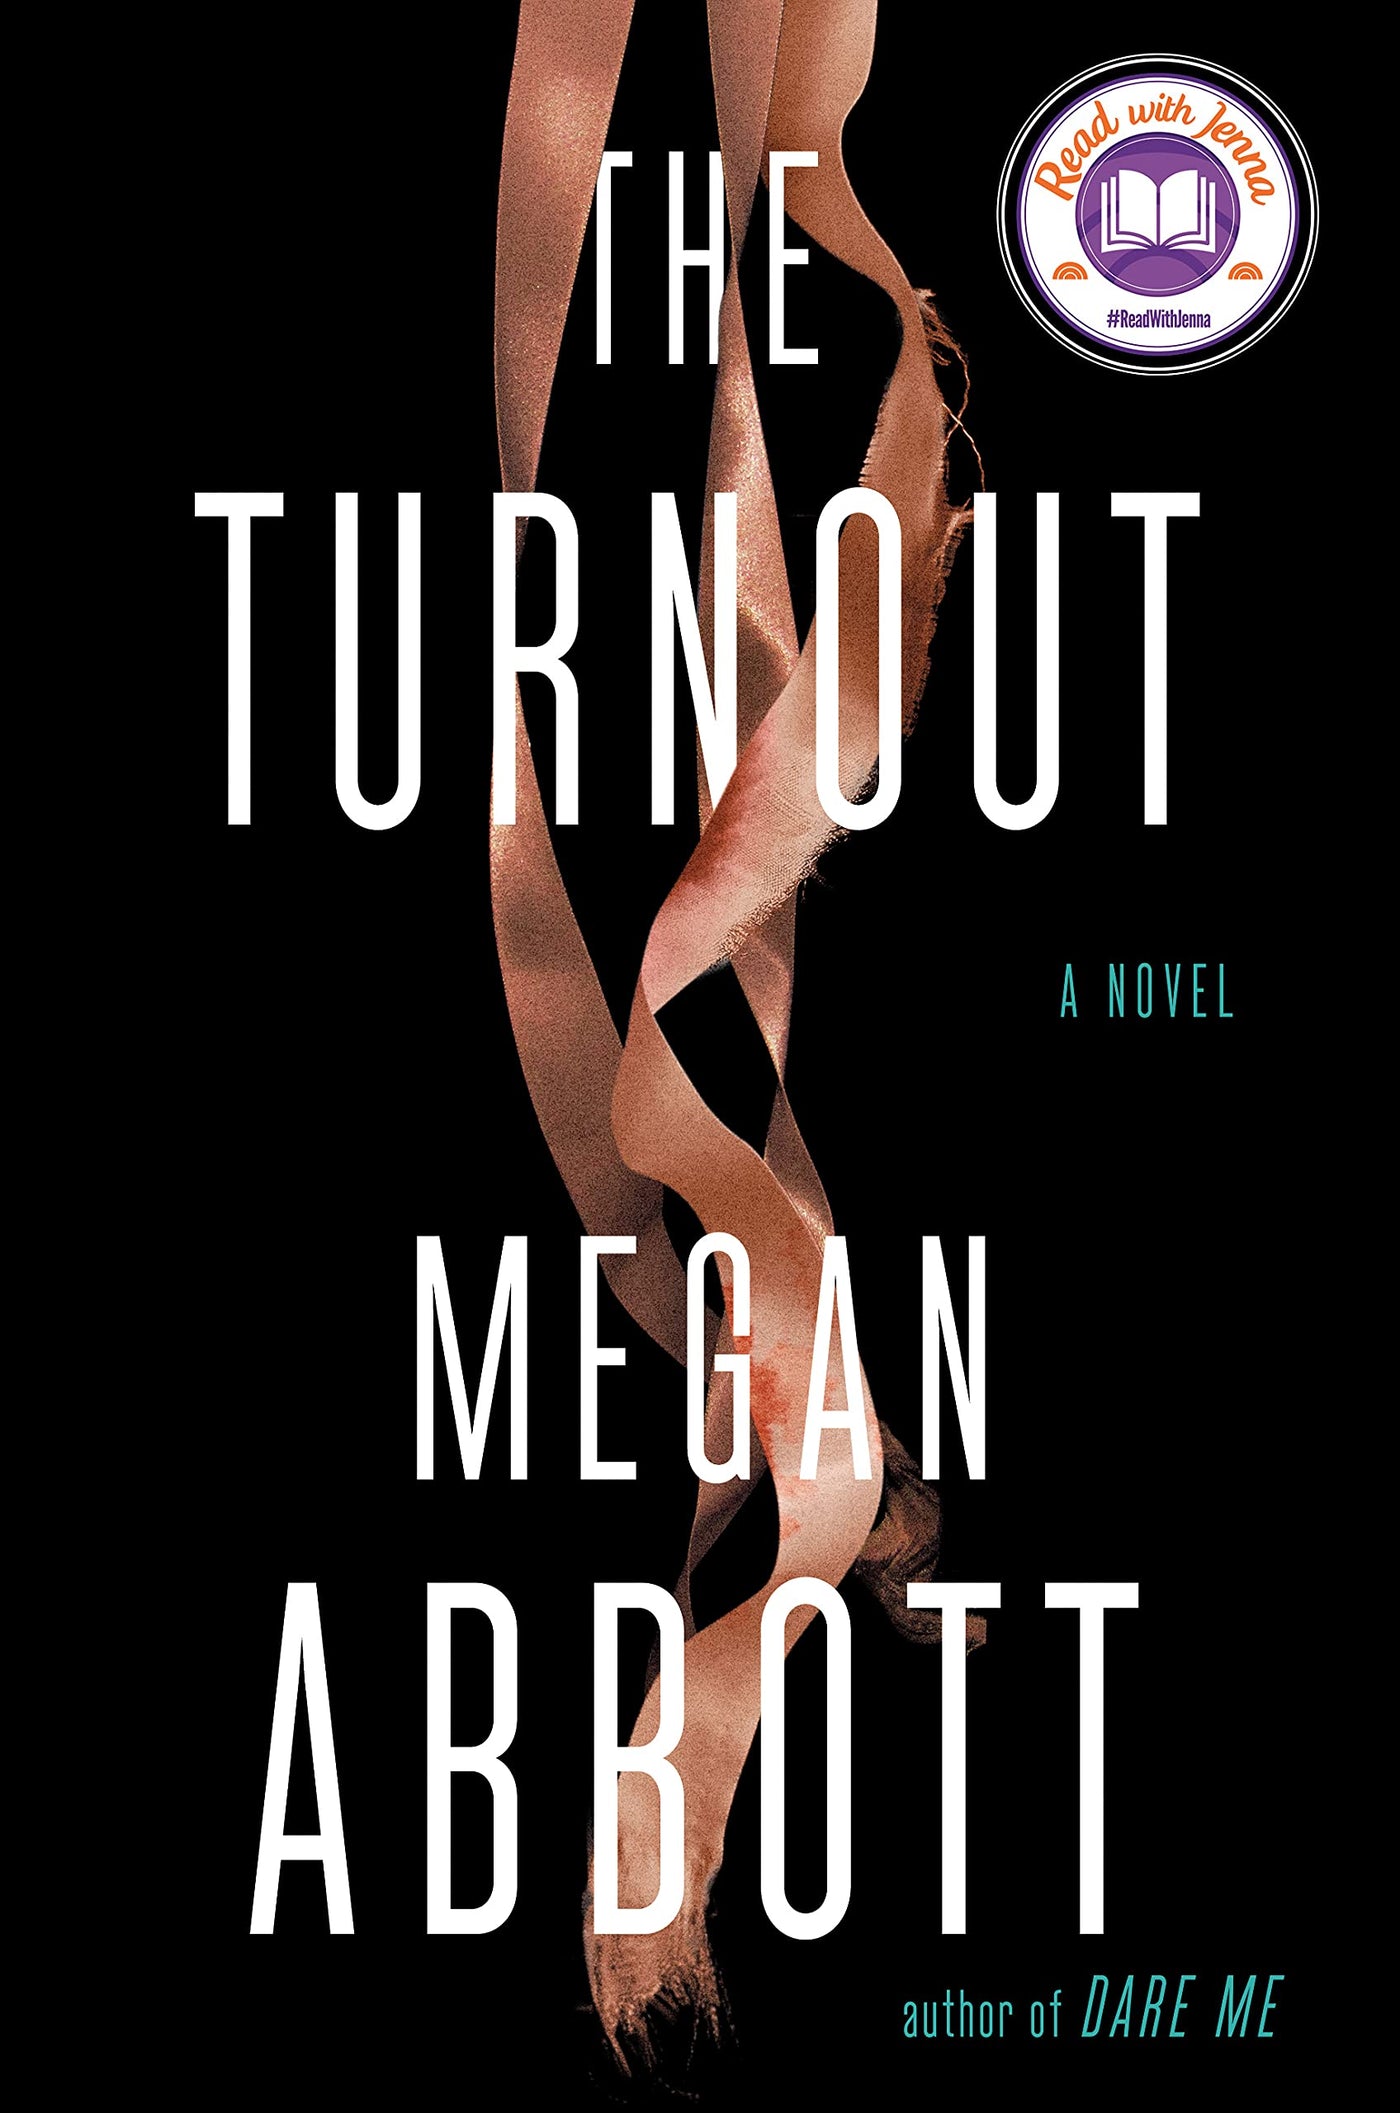 “The Turnout” by Megan Abbott